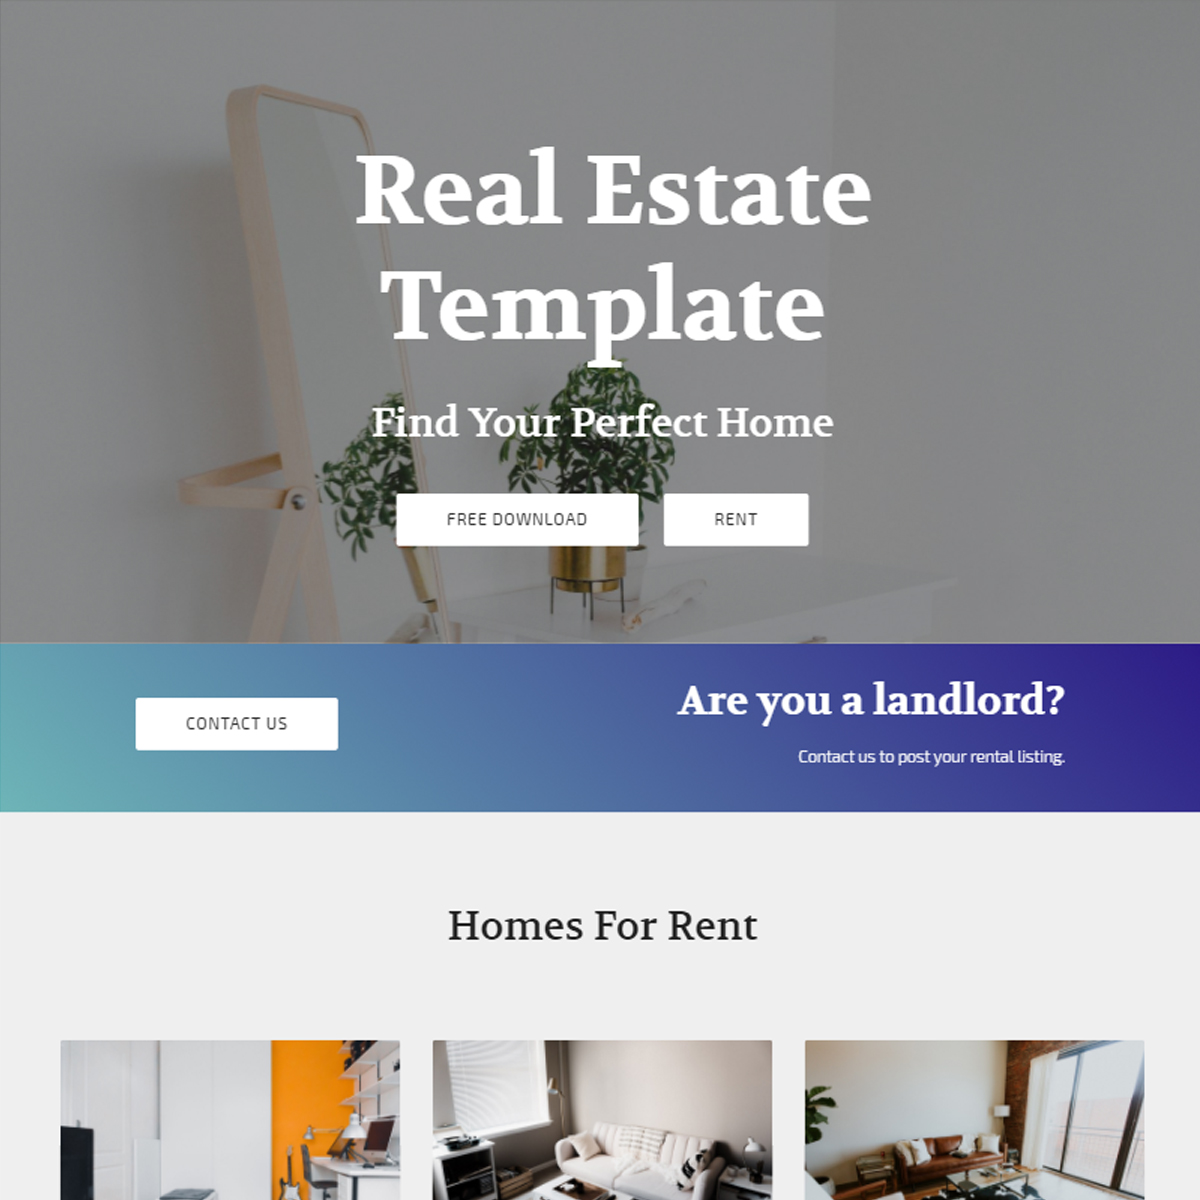 Responsive Bootstrap Real Estate Templates